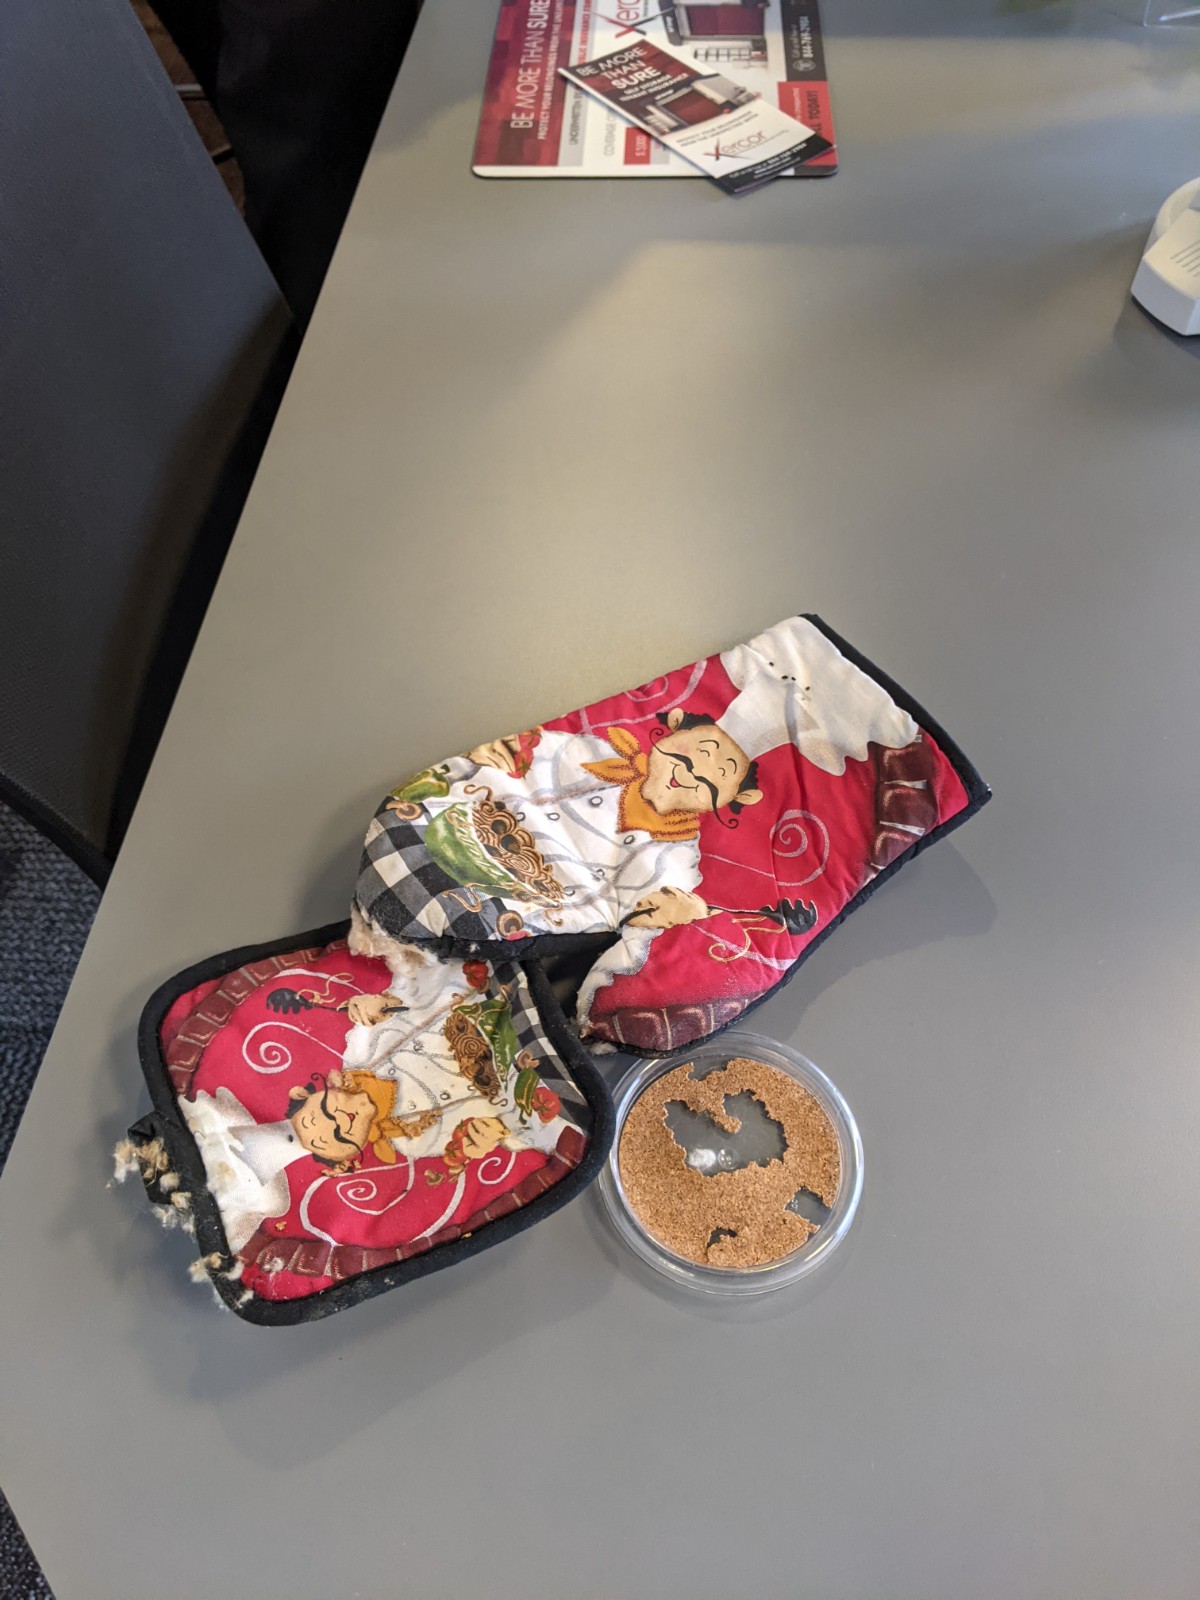 Damaged pot holders & drink coaster from rats. 